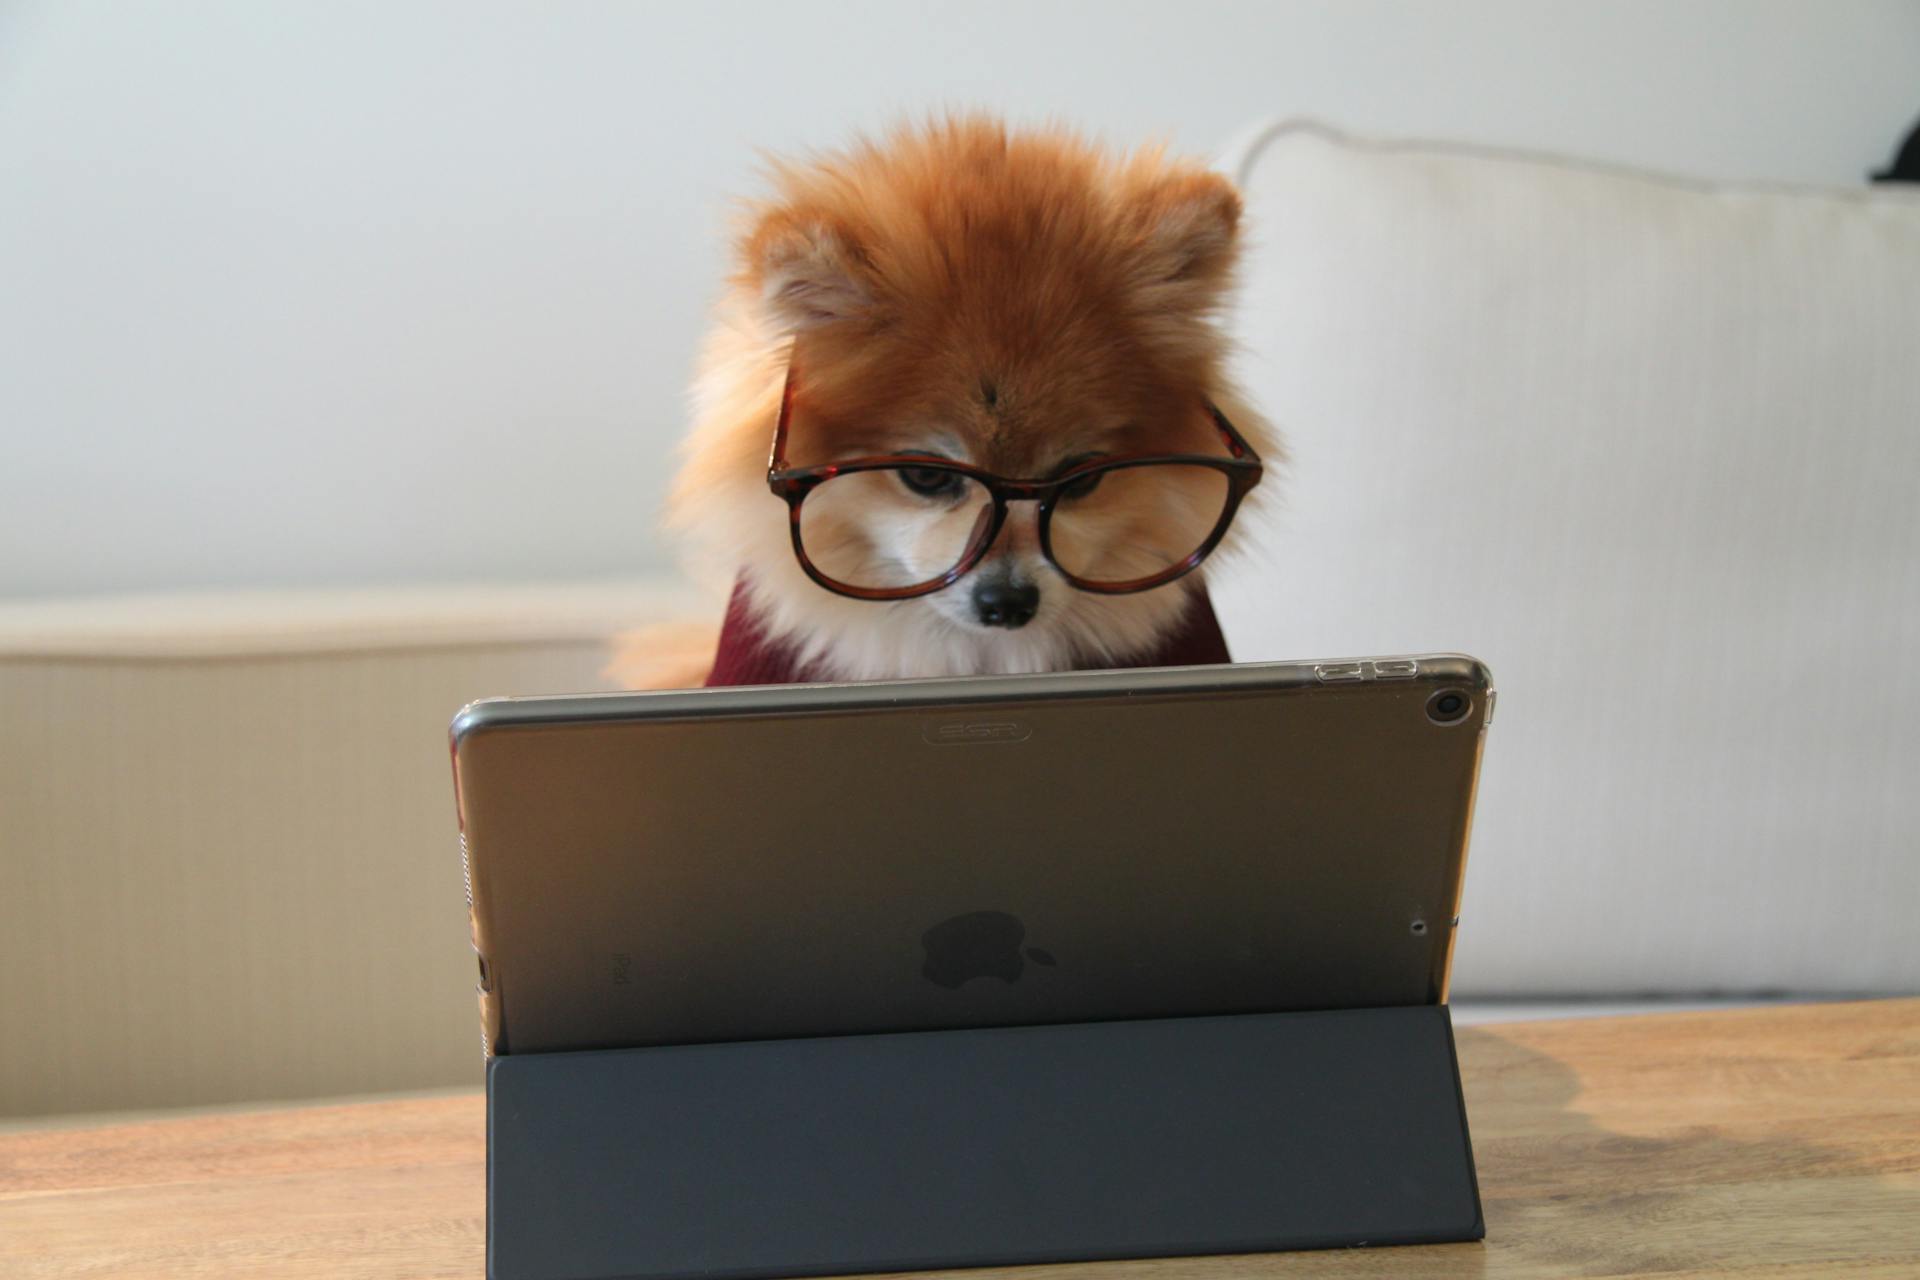 Dog with glasses sits infront of an ipad